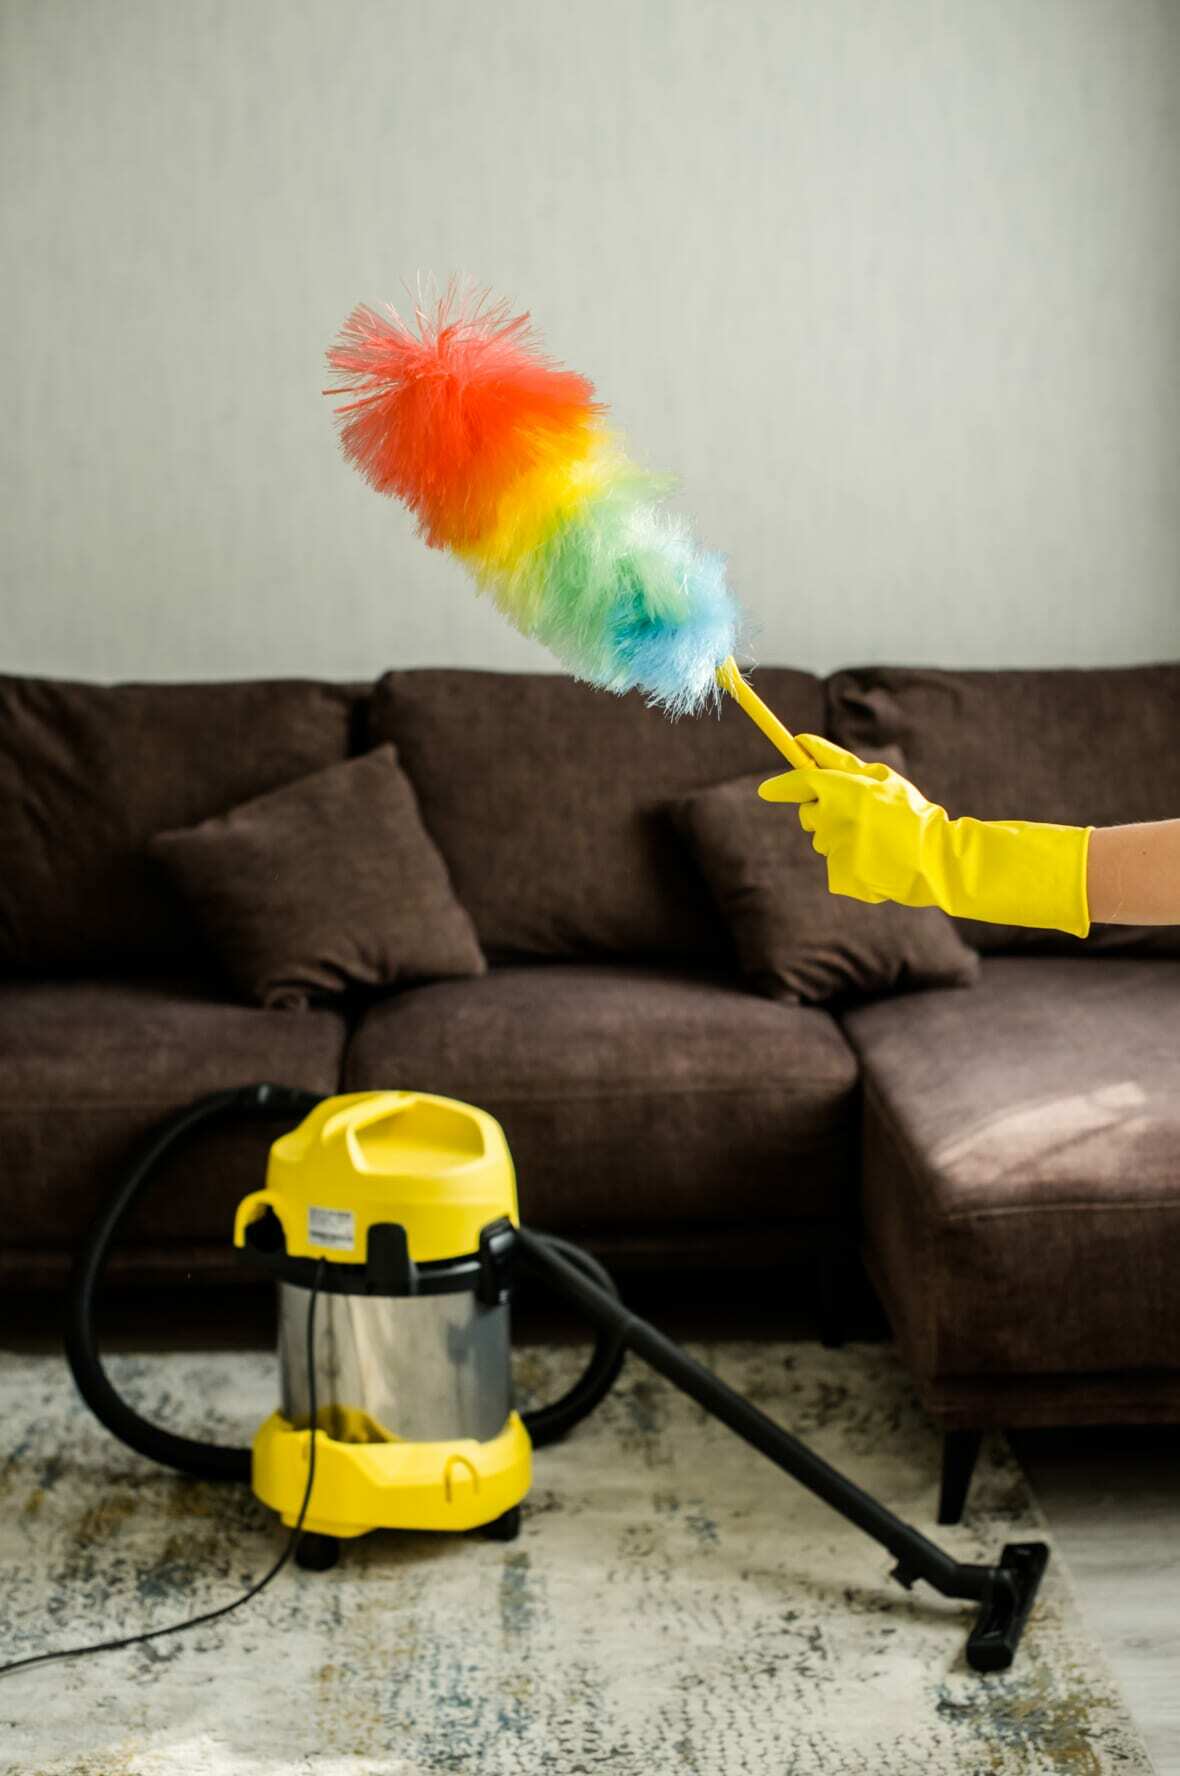 How to Disinfect a Couch: A Step-by-Step Cleaning Guide